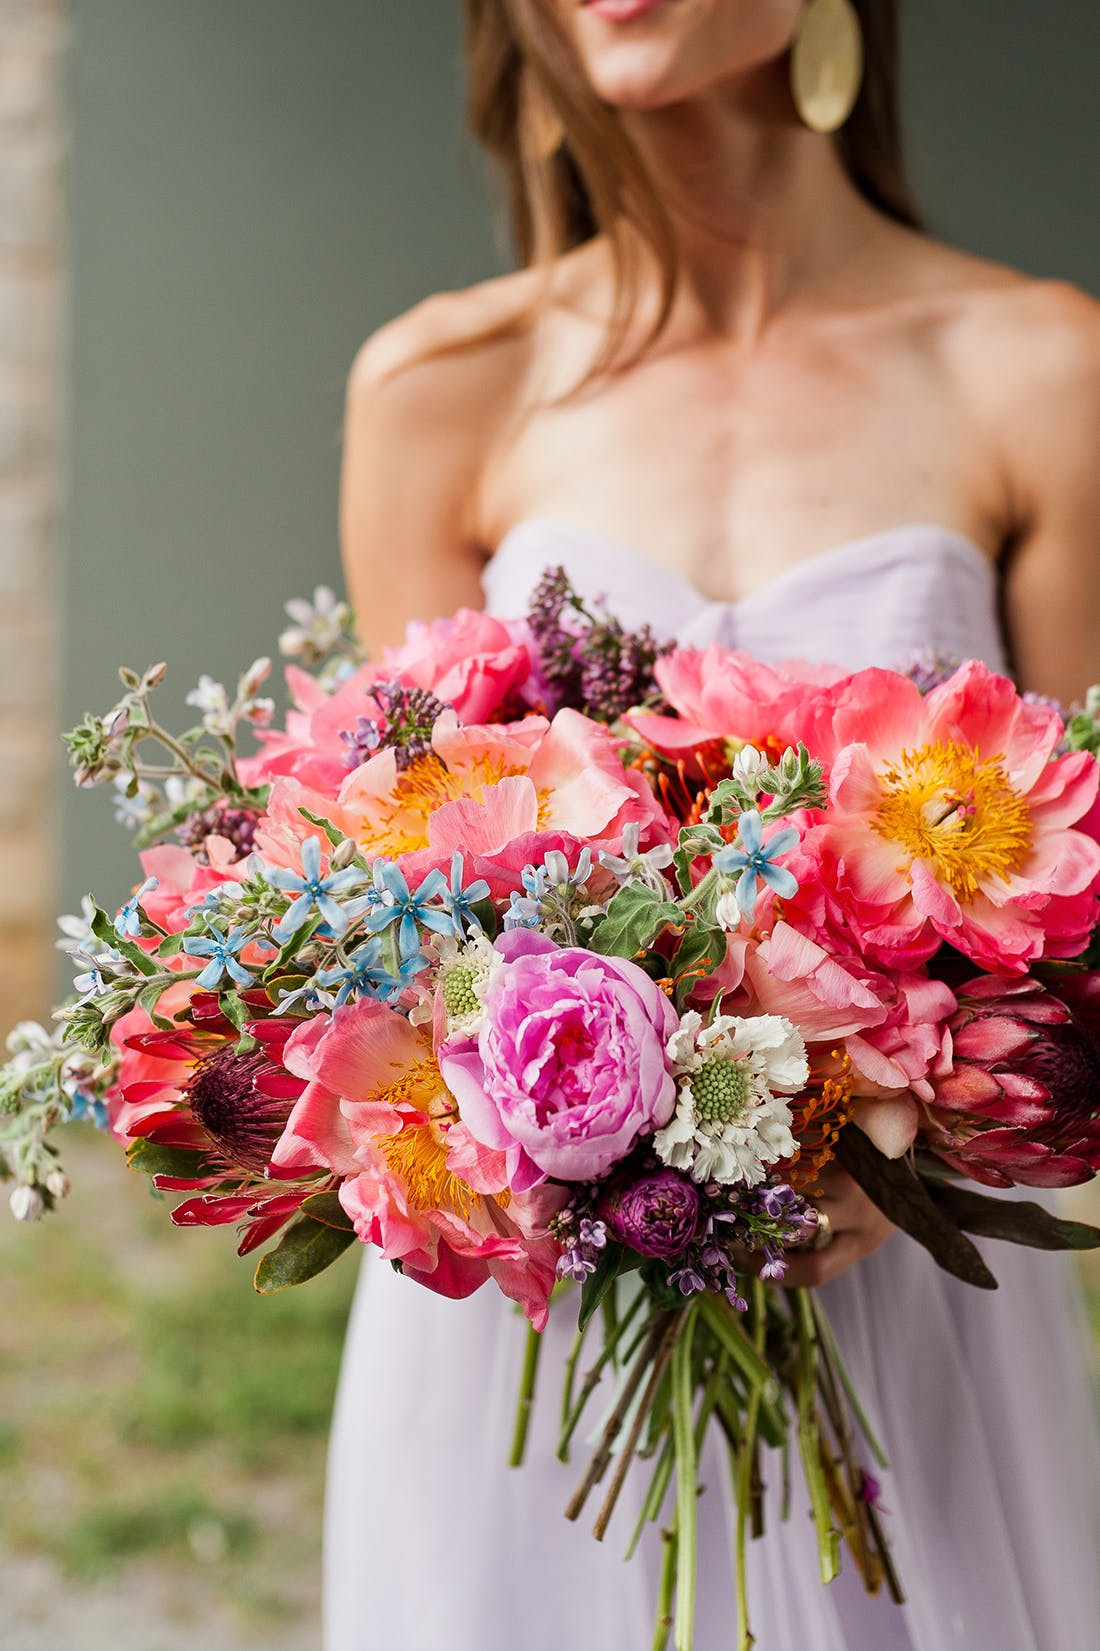 DIY Wedding Flower Bouquet
 Check Out This Stunning Wedding Bouquet You Can DIY